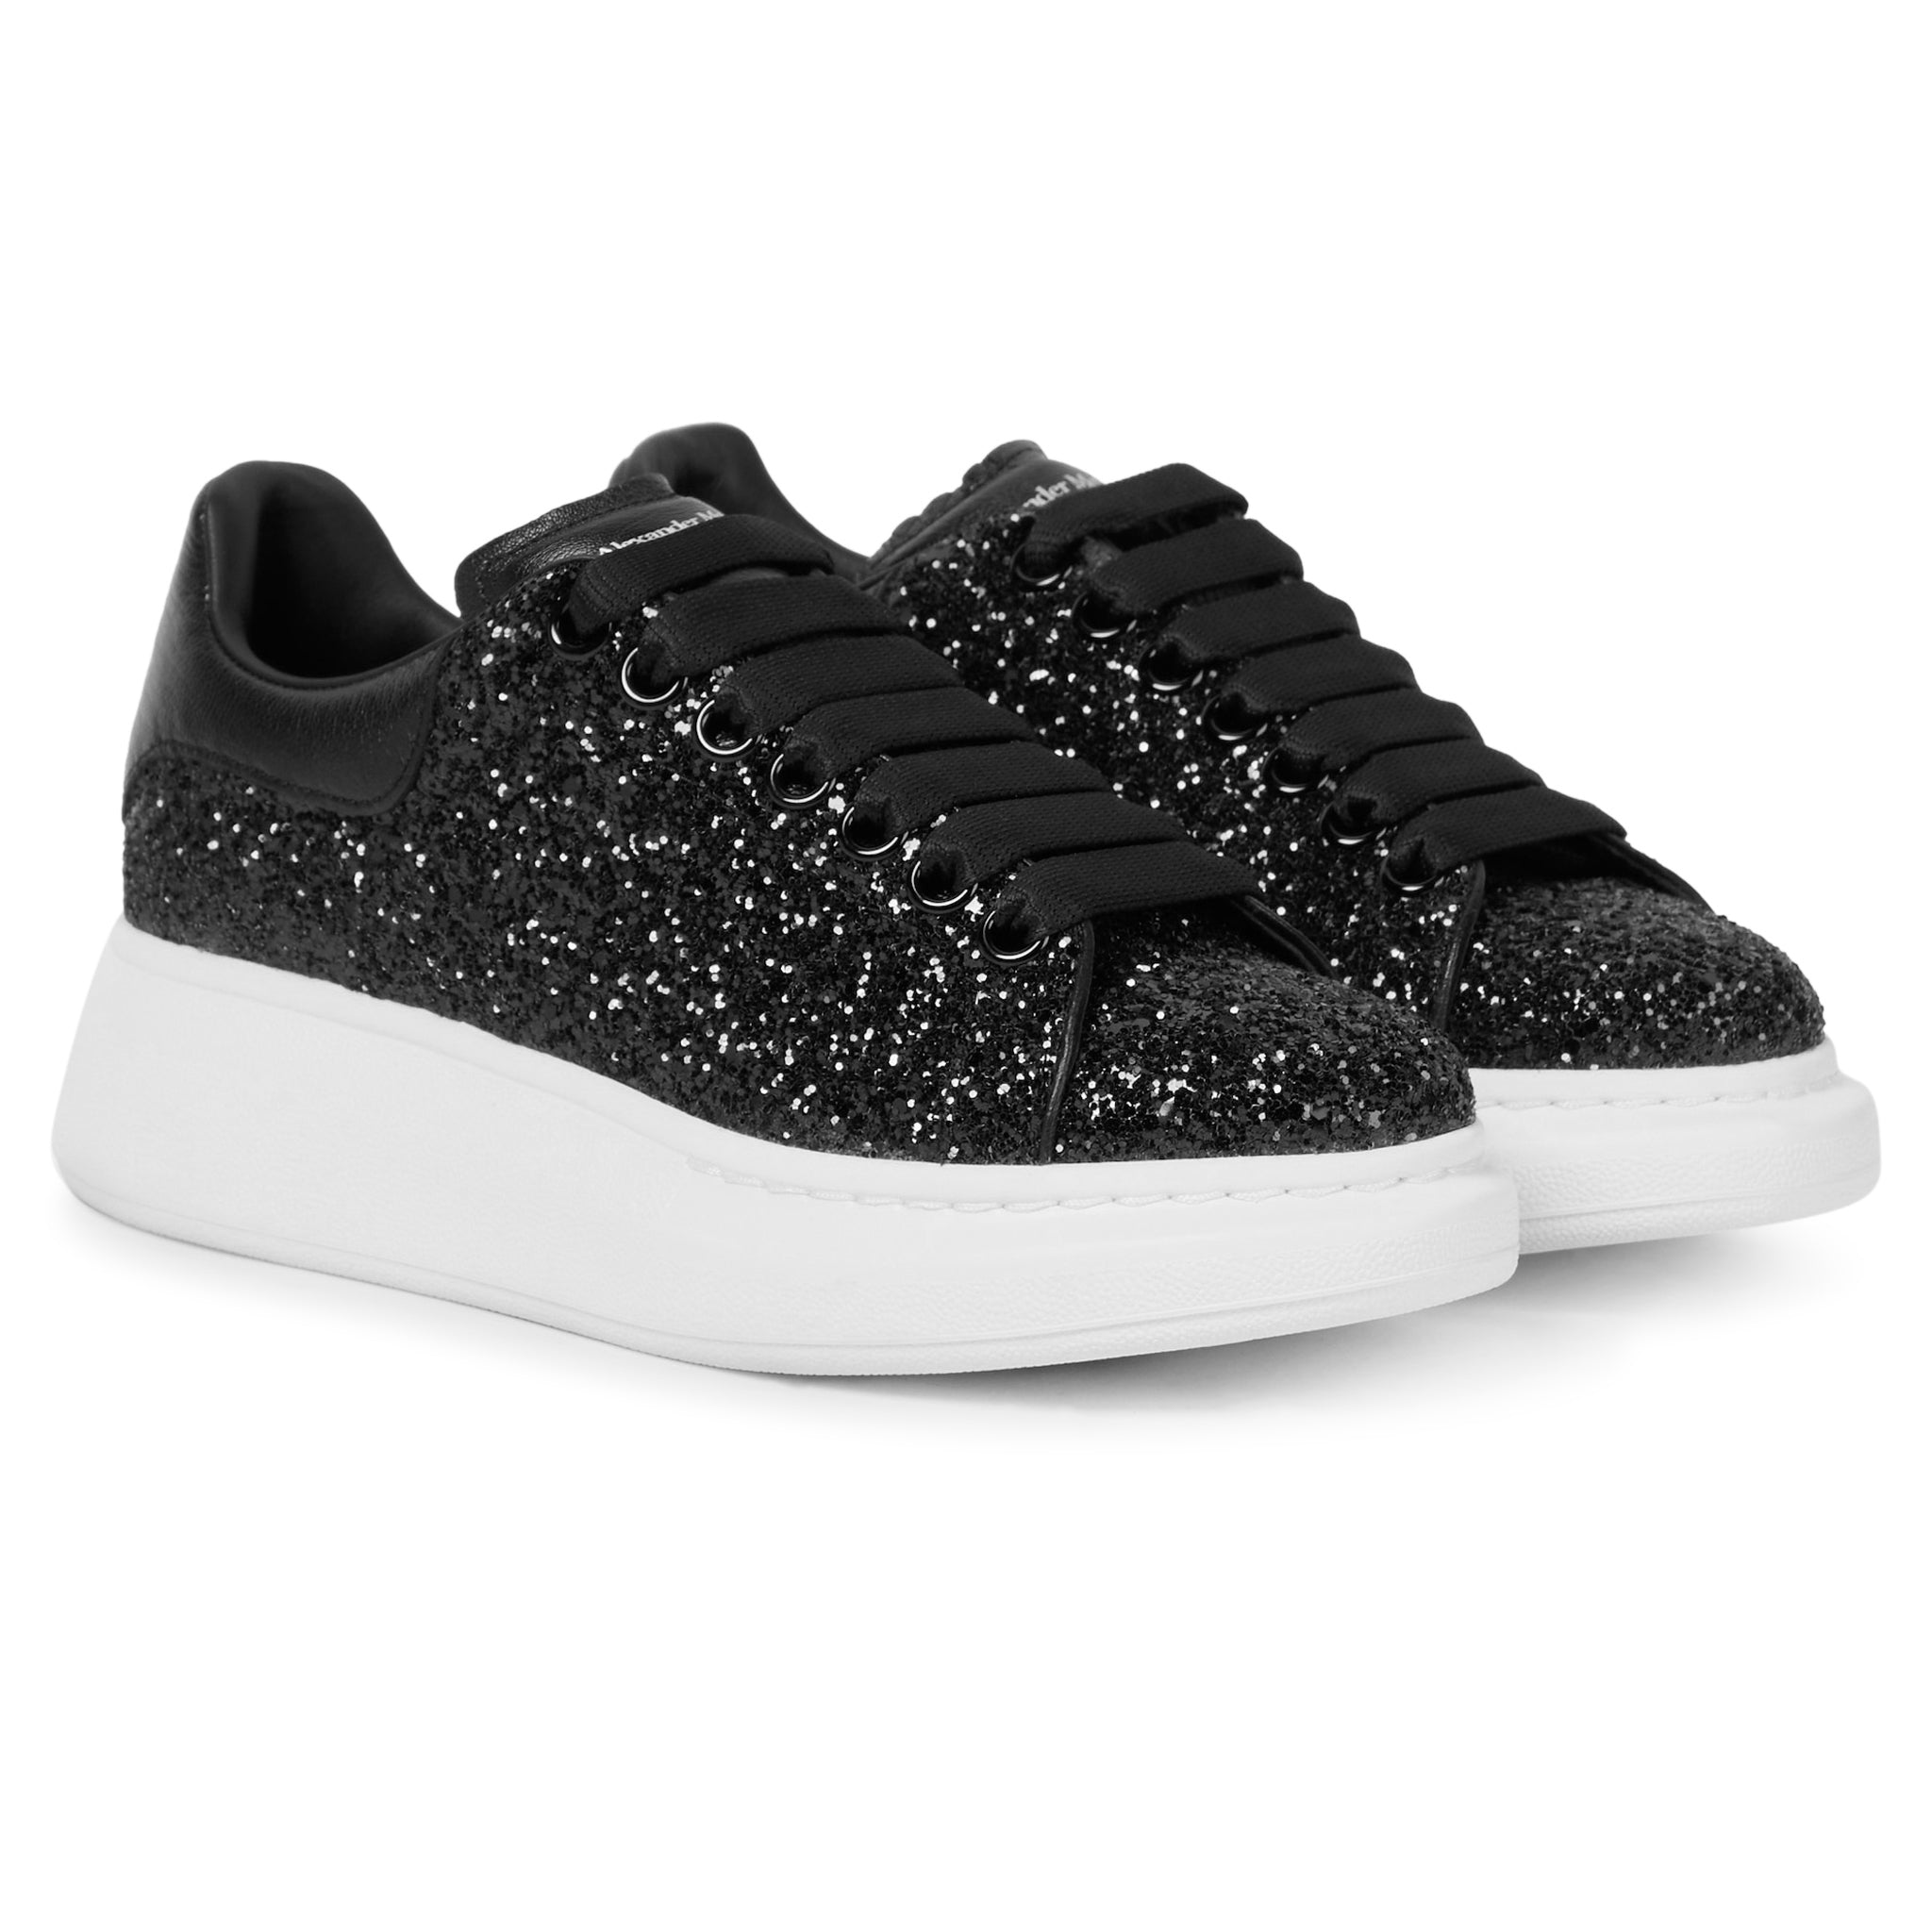 Front side view of Alexander Mcqueen Raised Sole Black Glitter Trainers